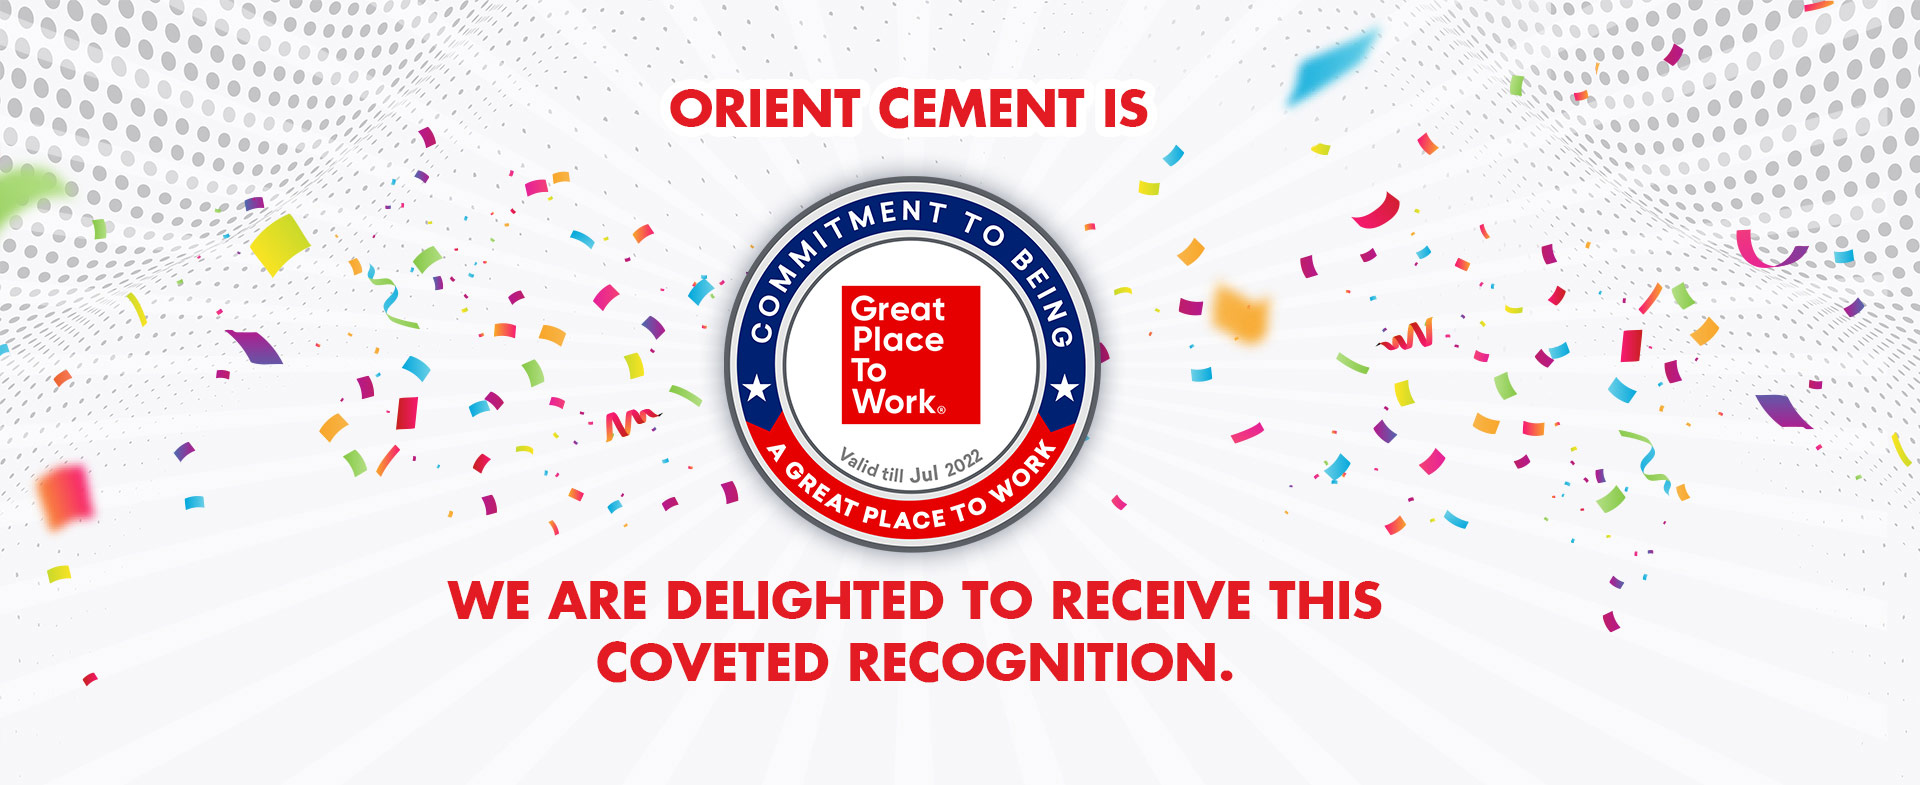 Orient Cement - The Leading Cement Manufacturer in India